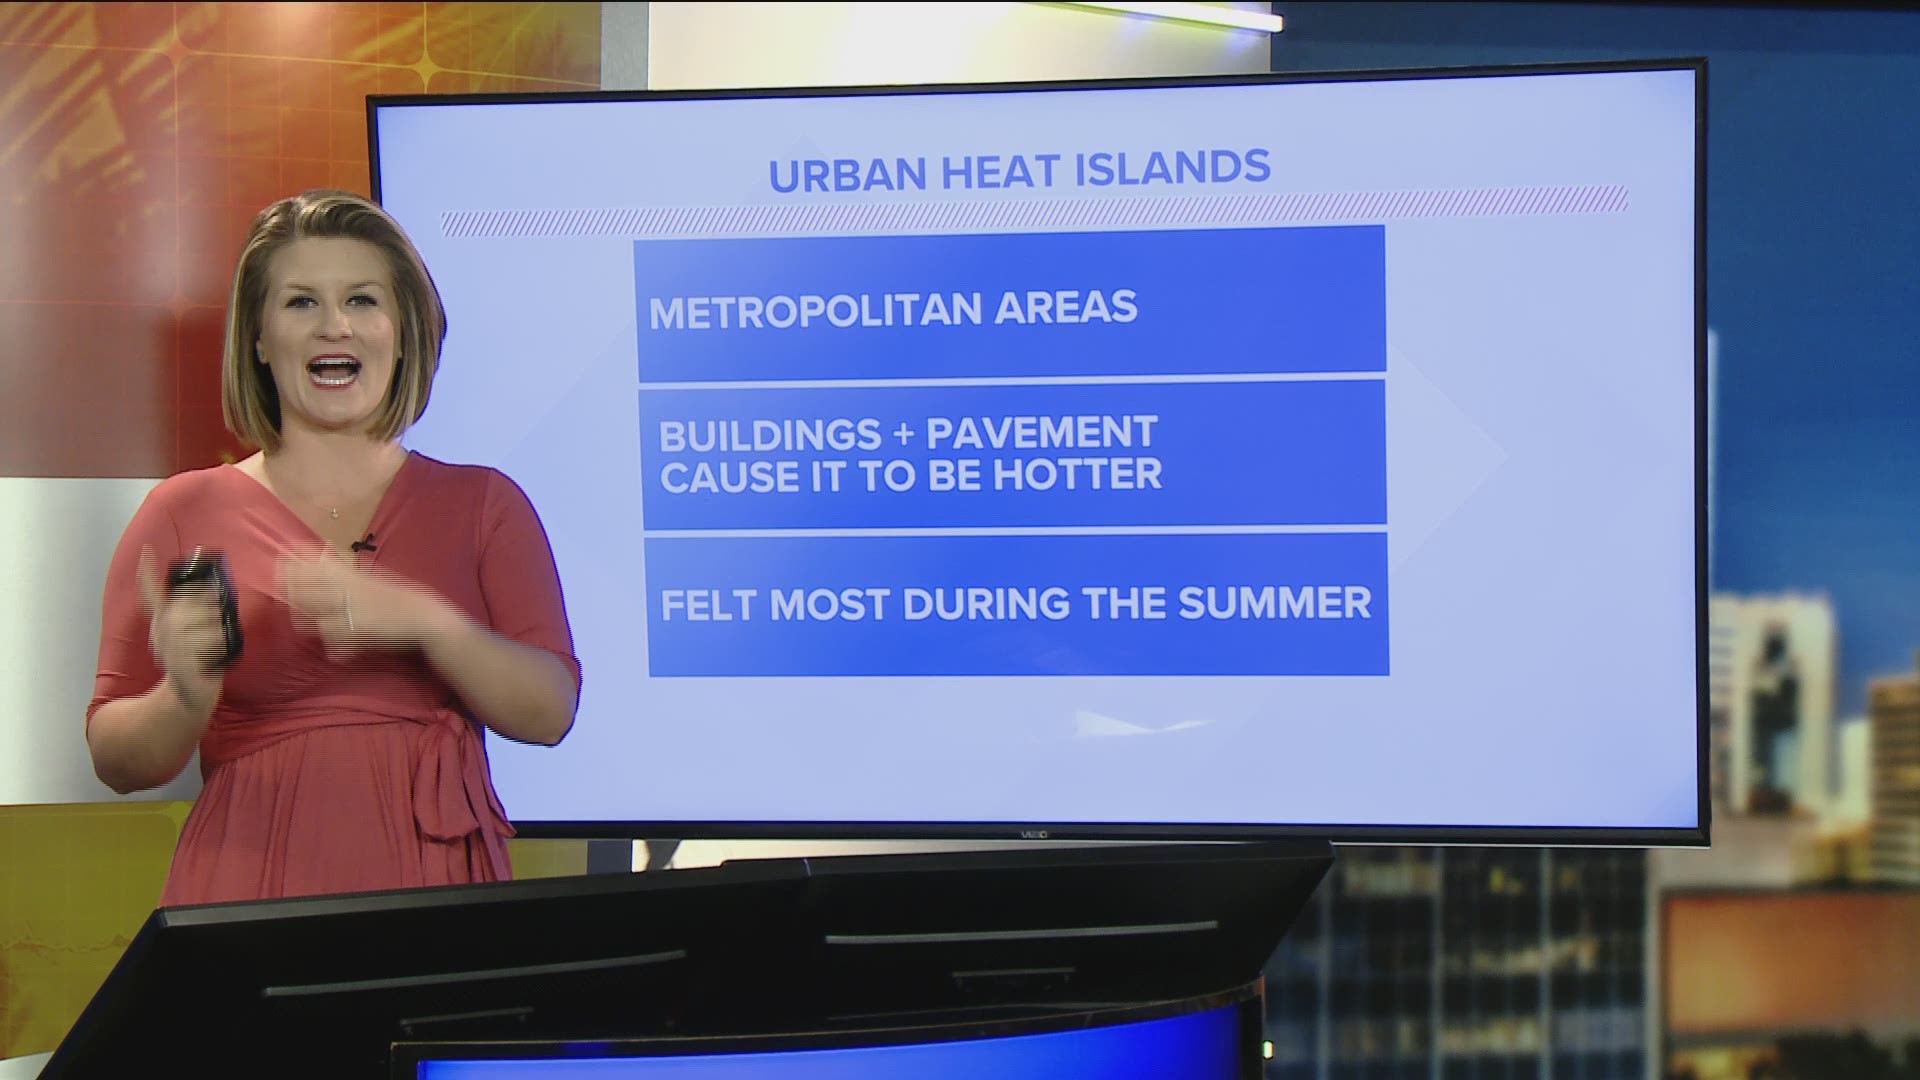 Urban heat islands are metropolitan areas that are hotter than their outlying regions, with the impacts felt most during summer months.